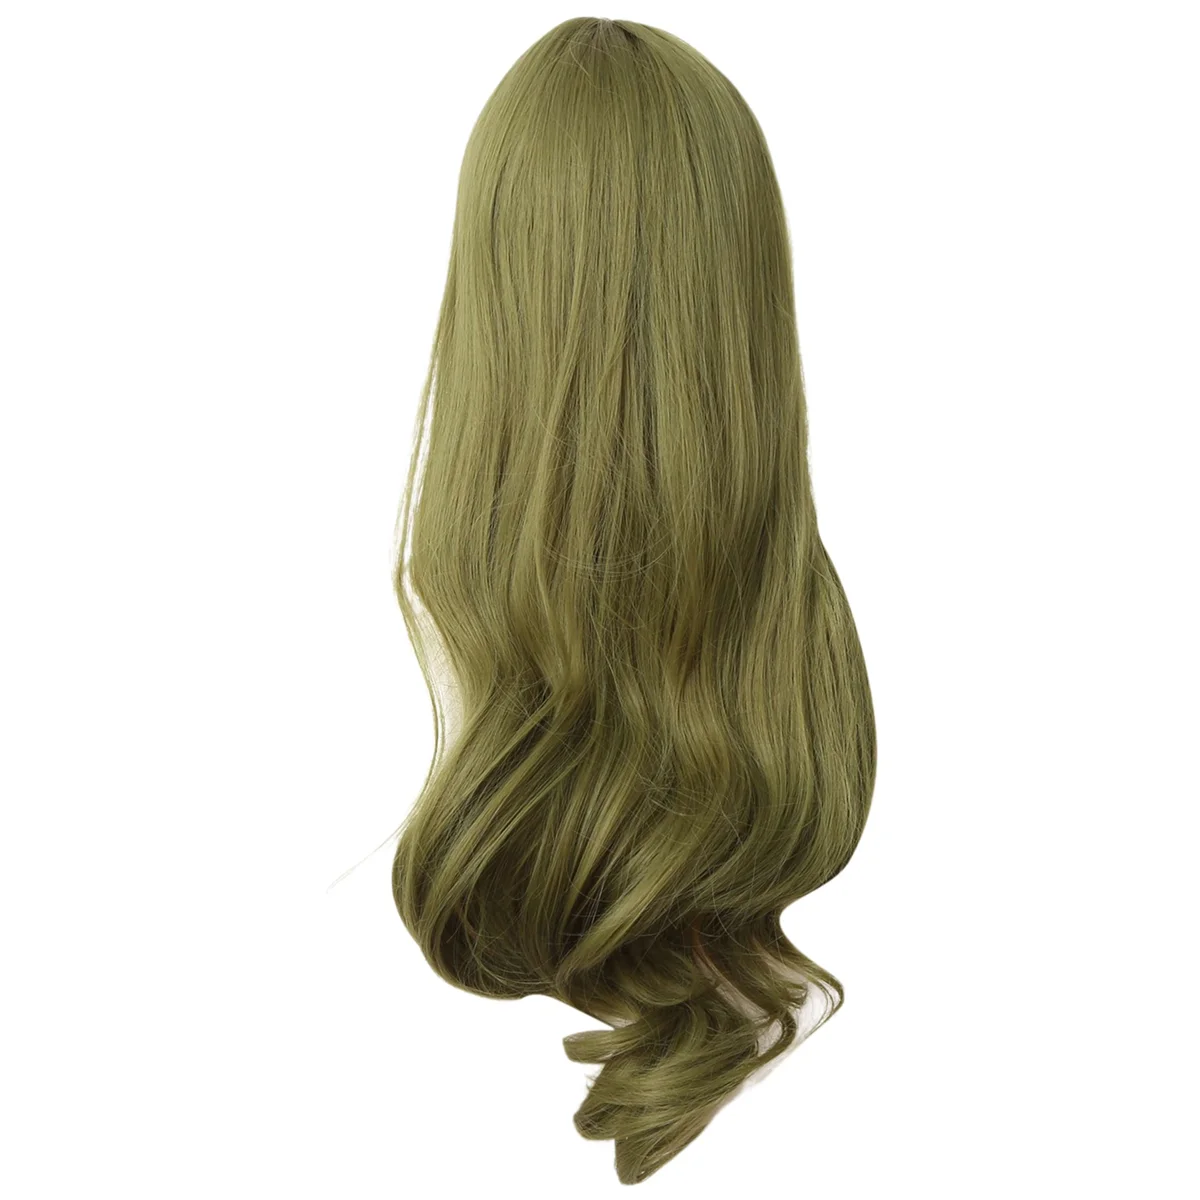 

Mint Green Bangs Big Wavy Long Curly Hair Realistic Long Wig Synthetic Wig for Cosplay Masquerade Christmas Halloween